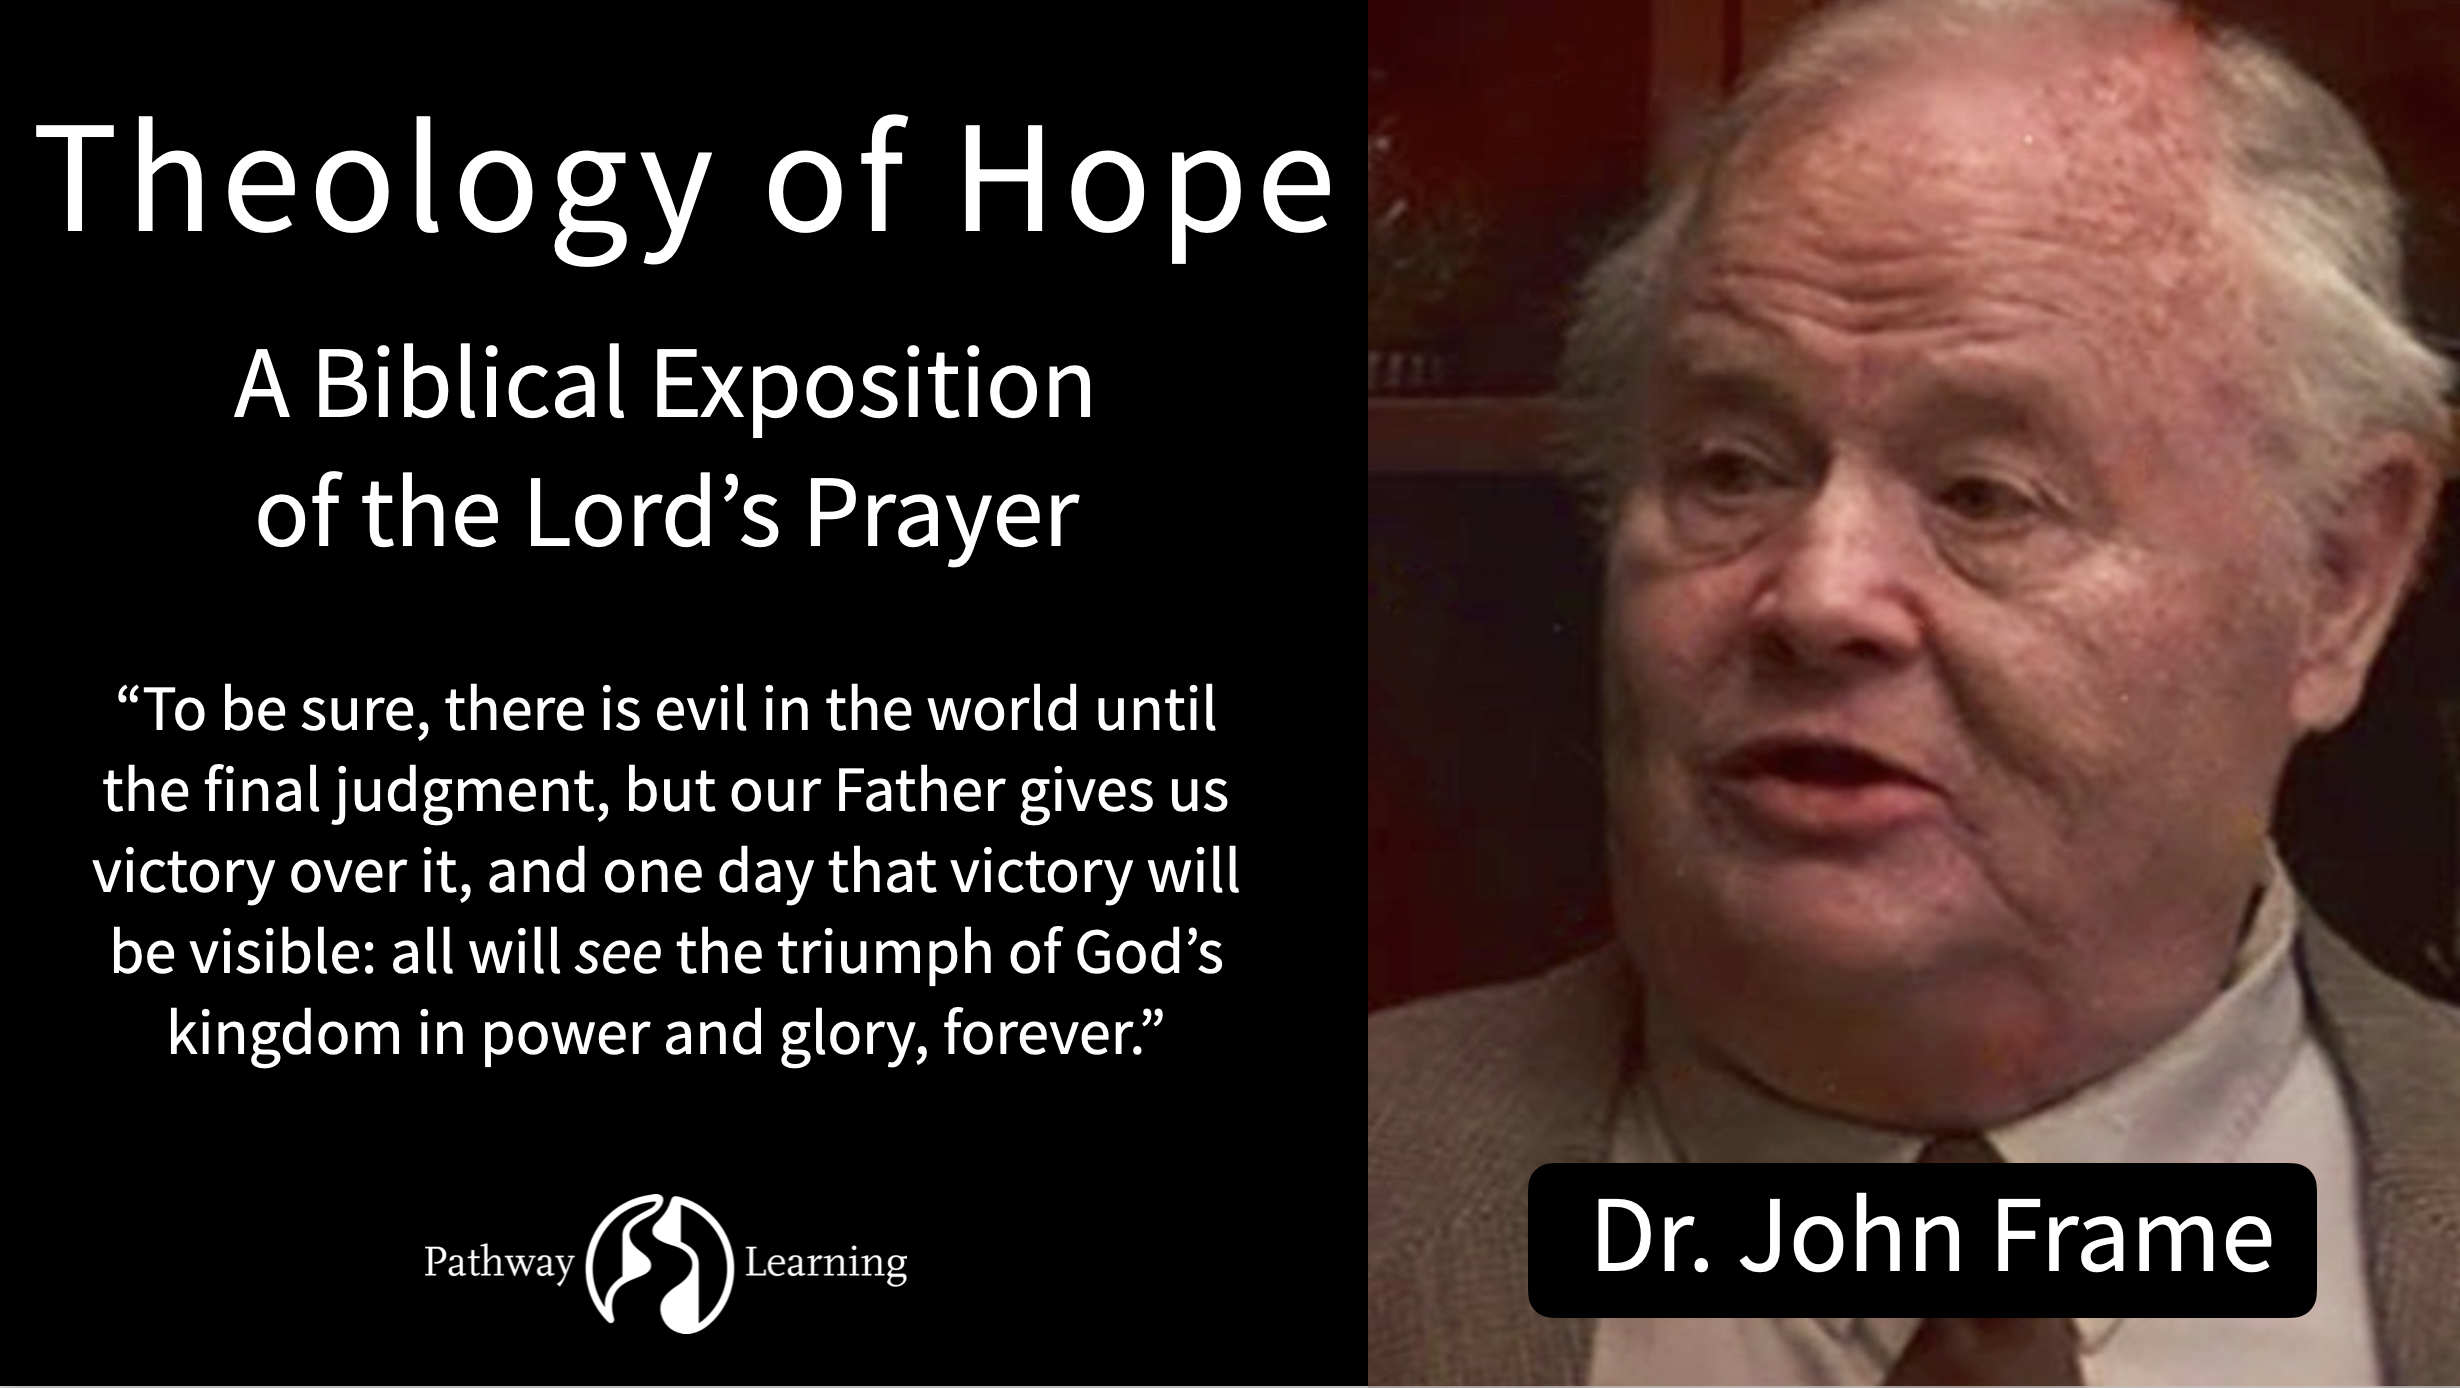 Introducing a Theology of Hope: A Biblical Exposition of the Lord's Prayer  by Dr. John Frame | Pathway Learning | Practical Seminary Training for  Church Leaders